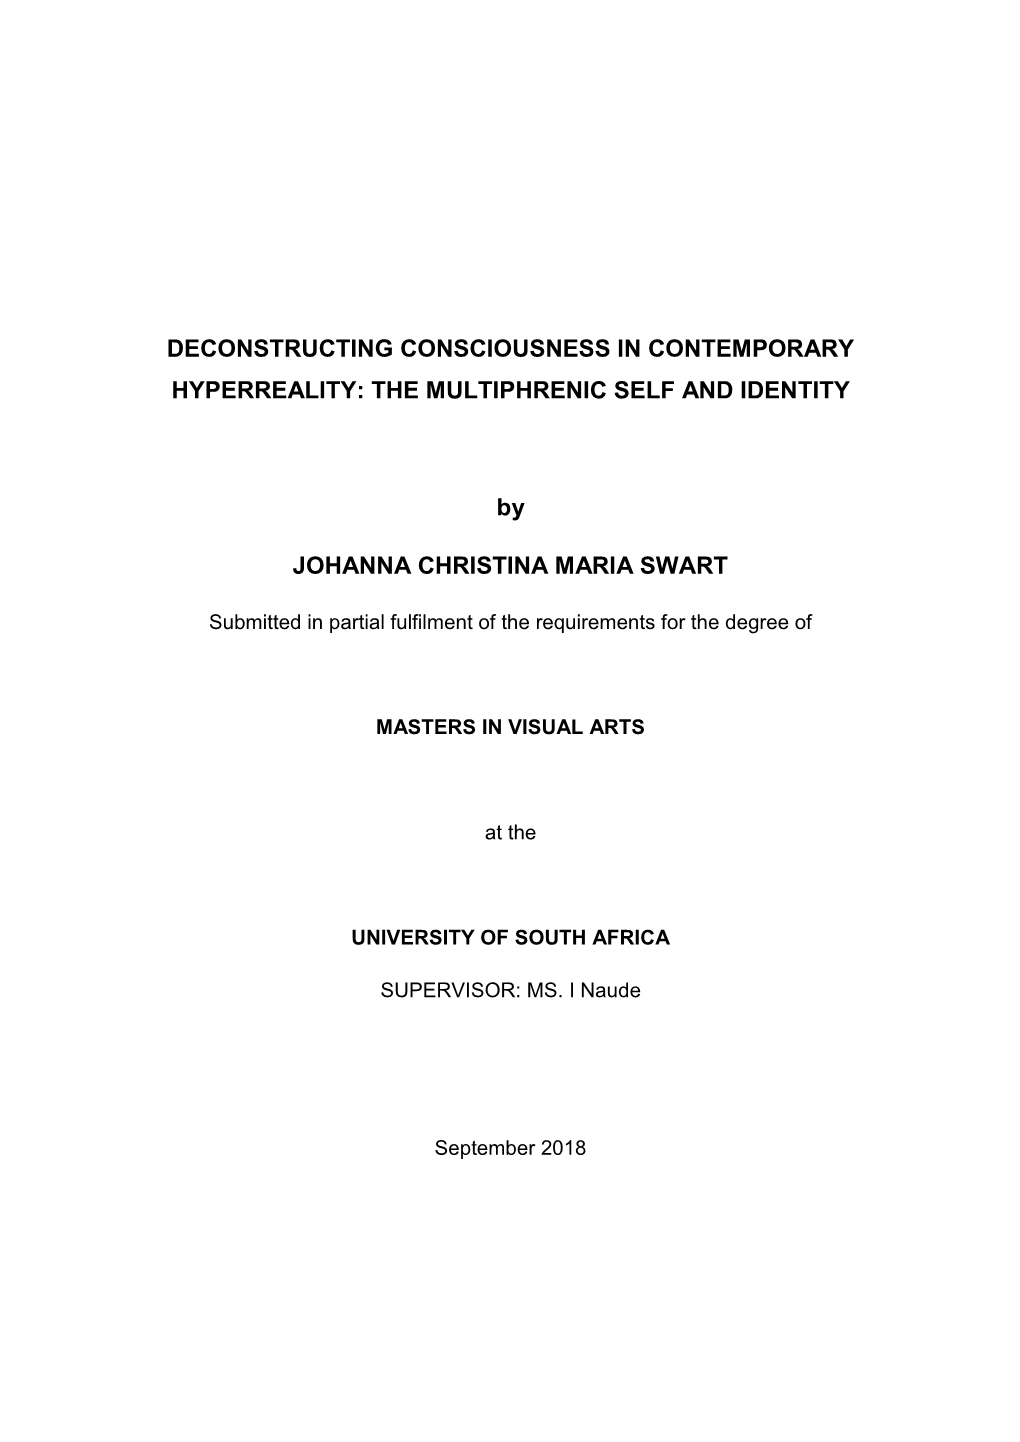 Deconstructing Consciousness in Contemporary Hyperreality: the Multiphrenic Self and Identity